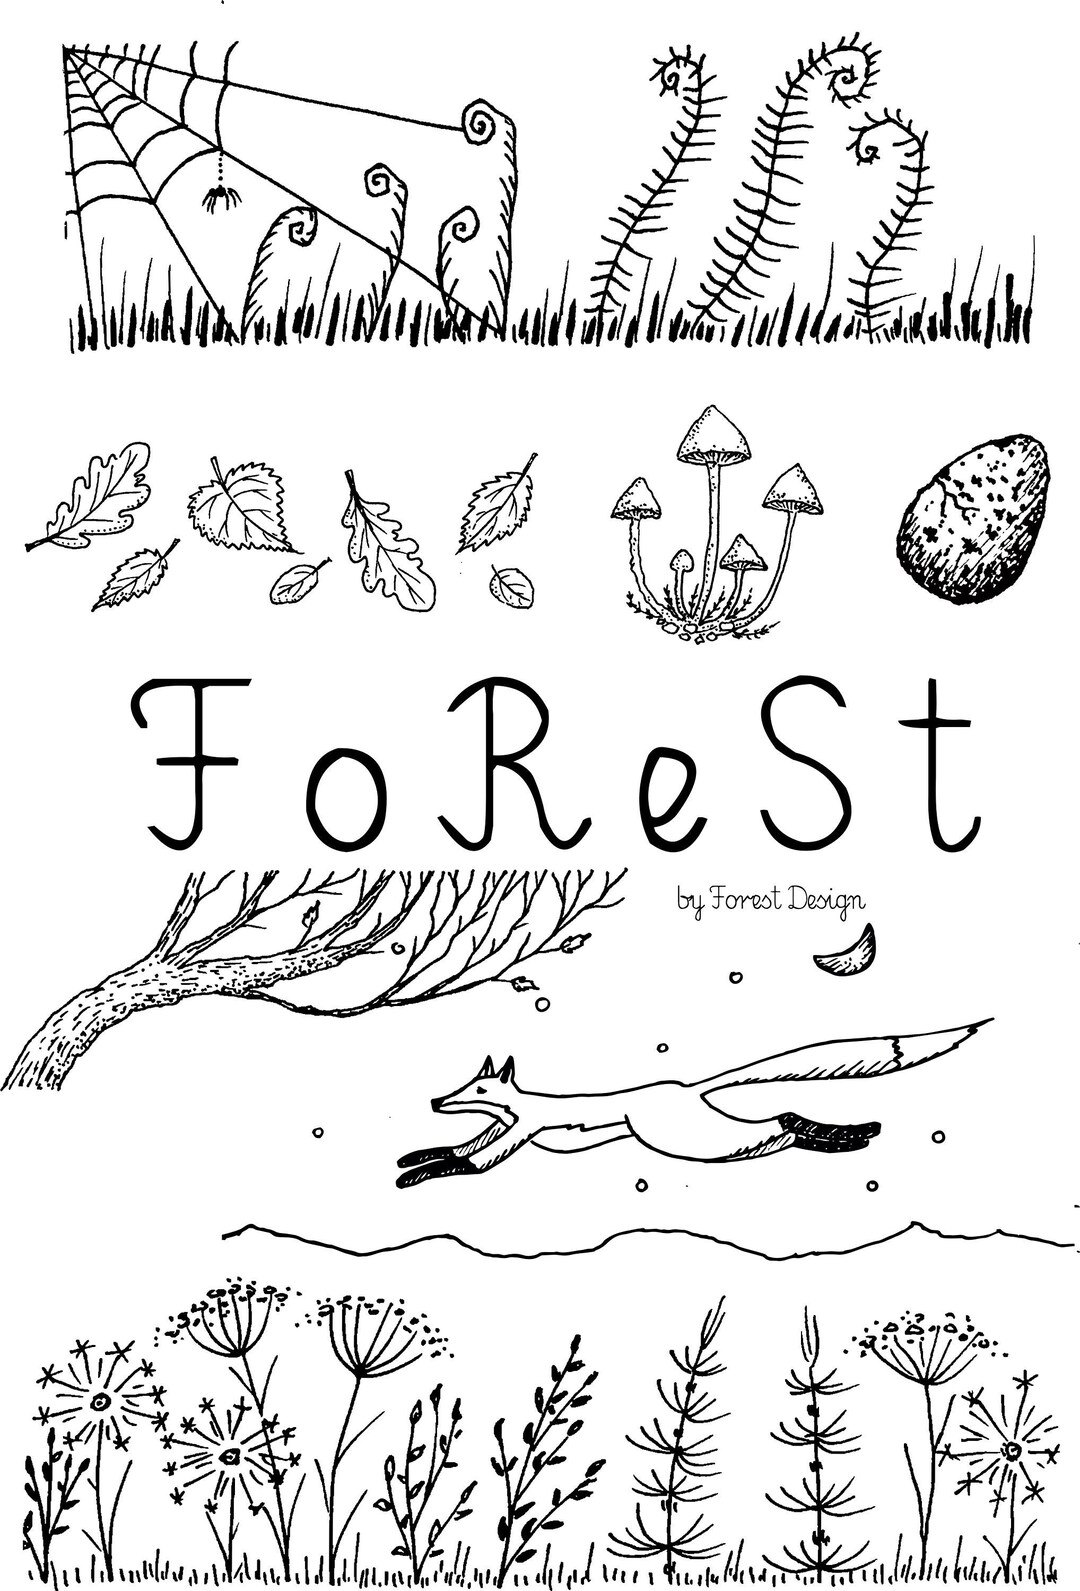 Magical Forest coloring page for download/Folklore Etsy 日本